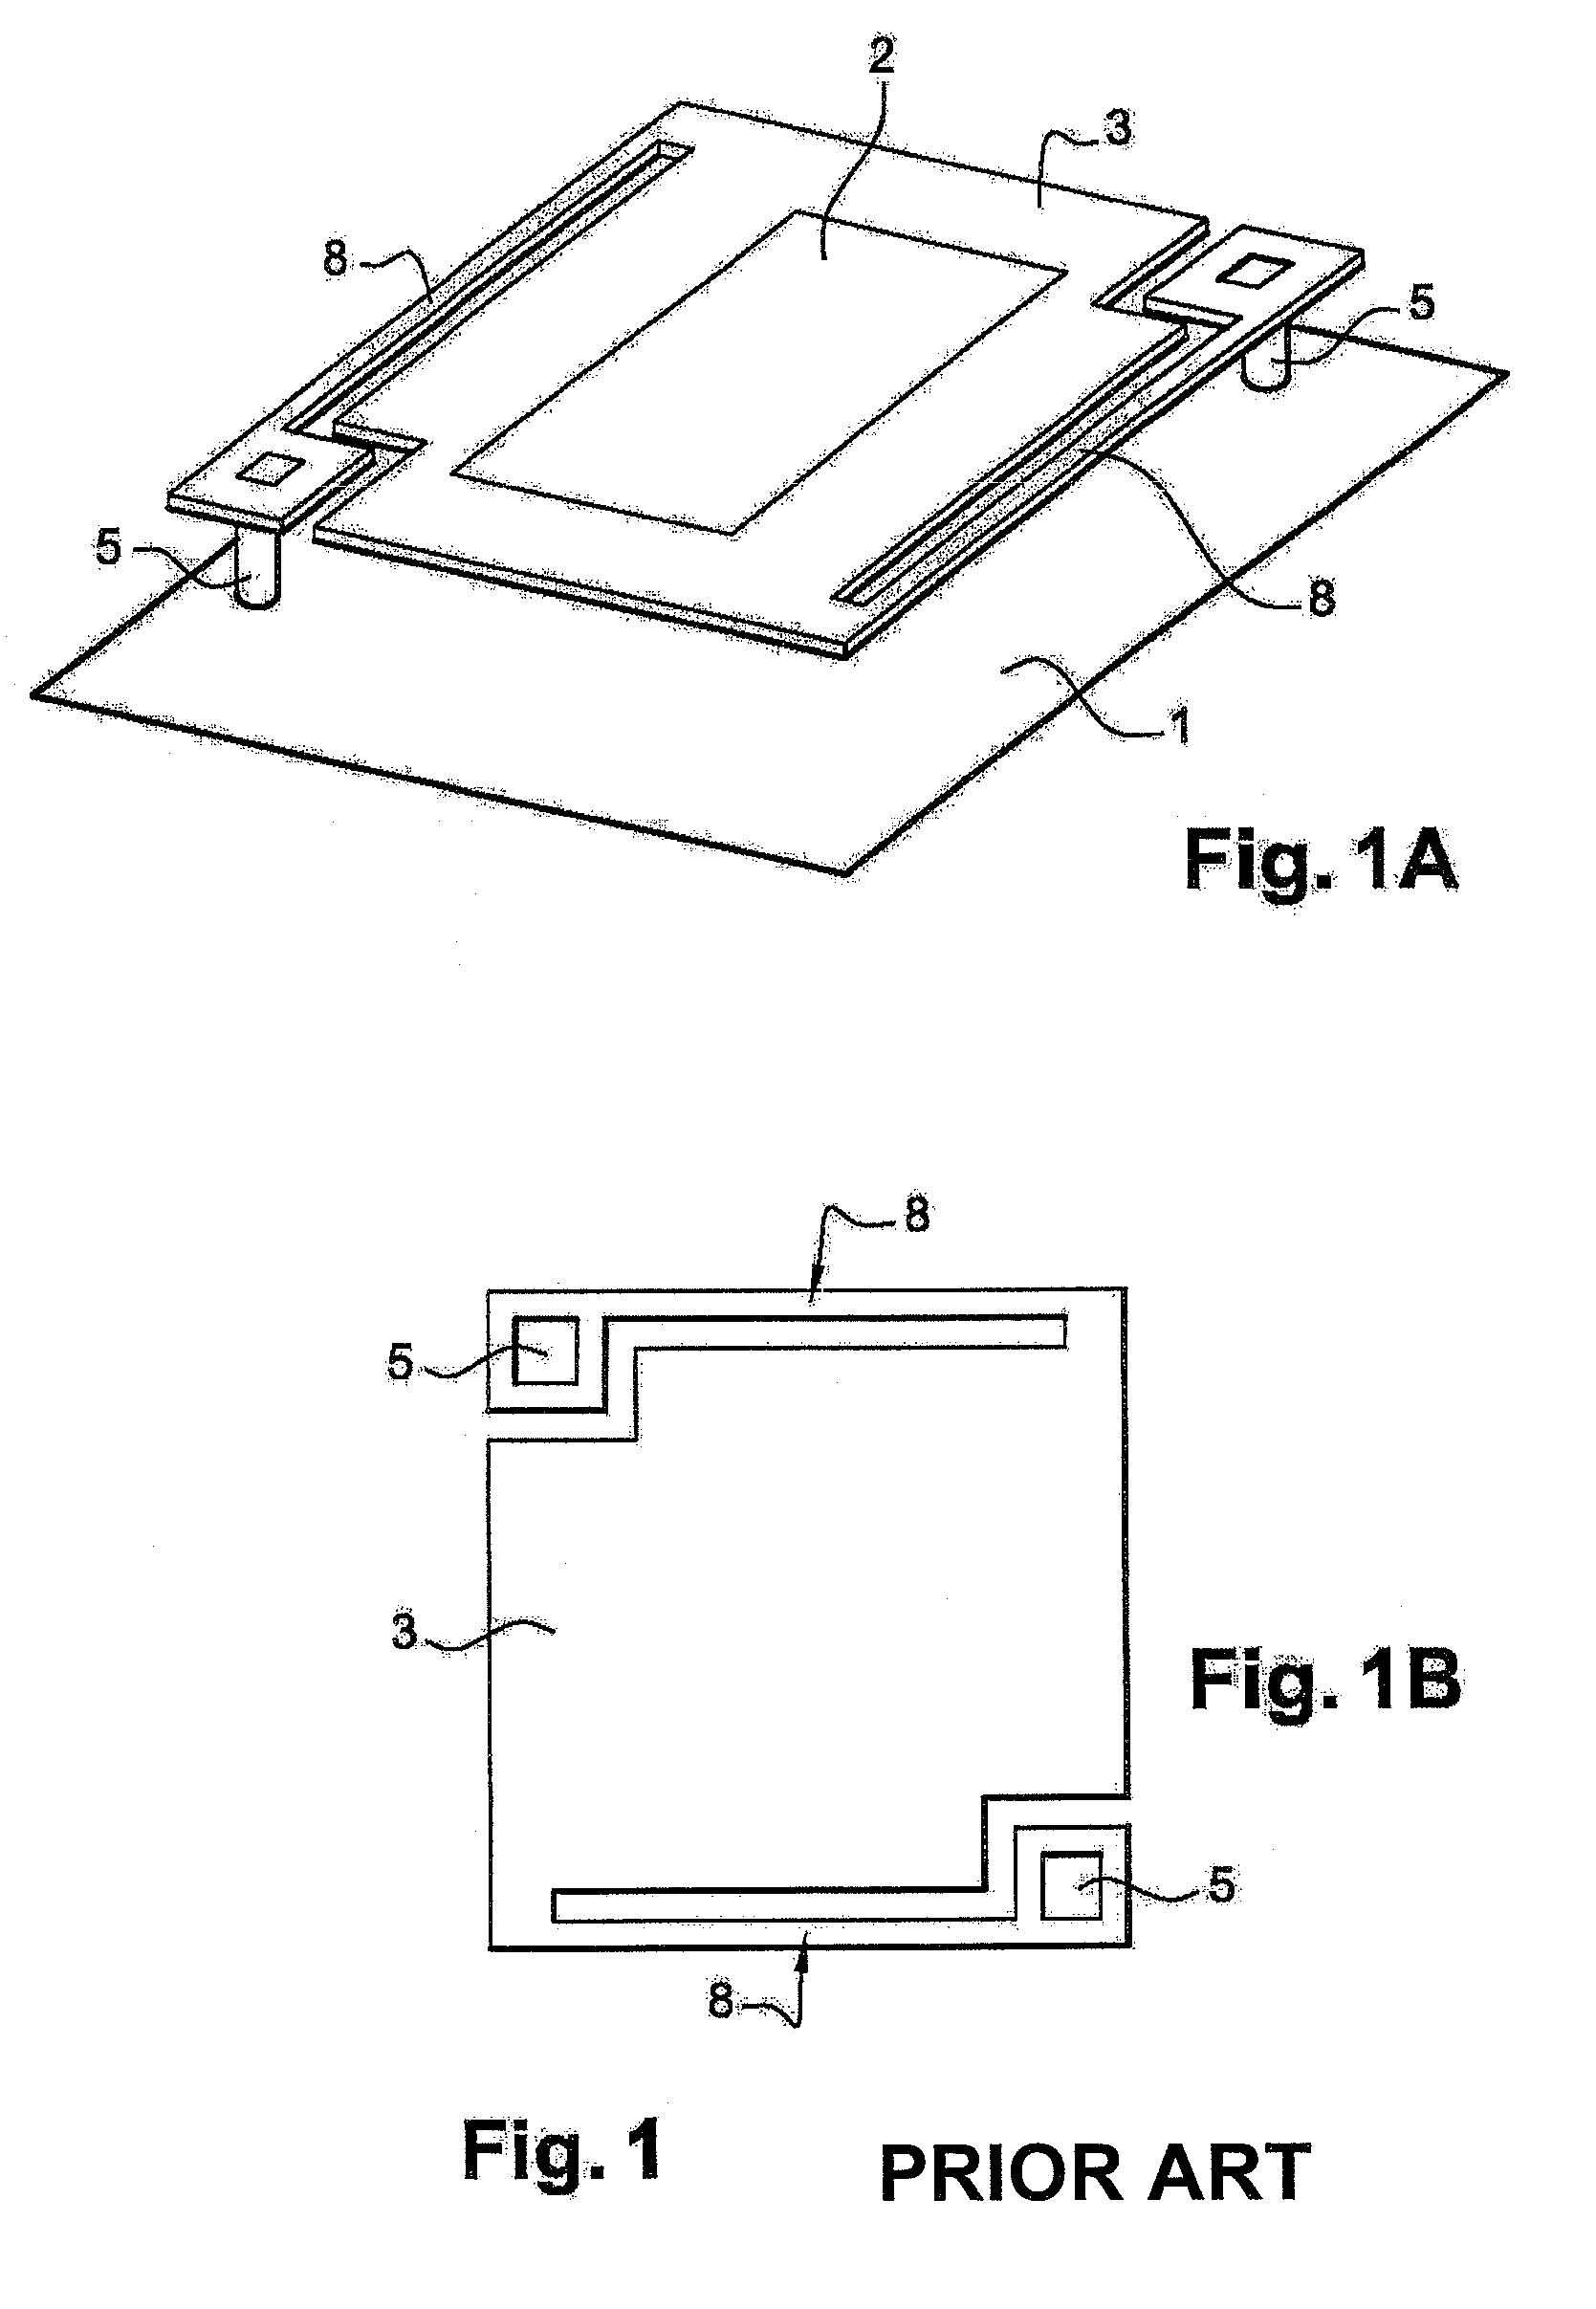 Thermal detector for electromagnetic radiation and infrared detection device using such detectors